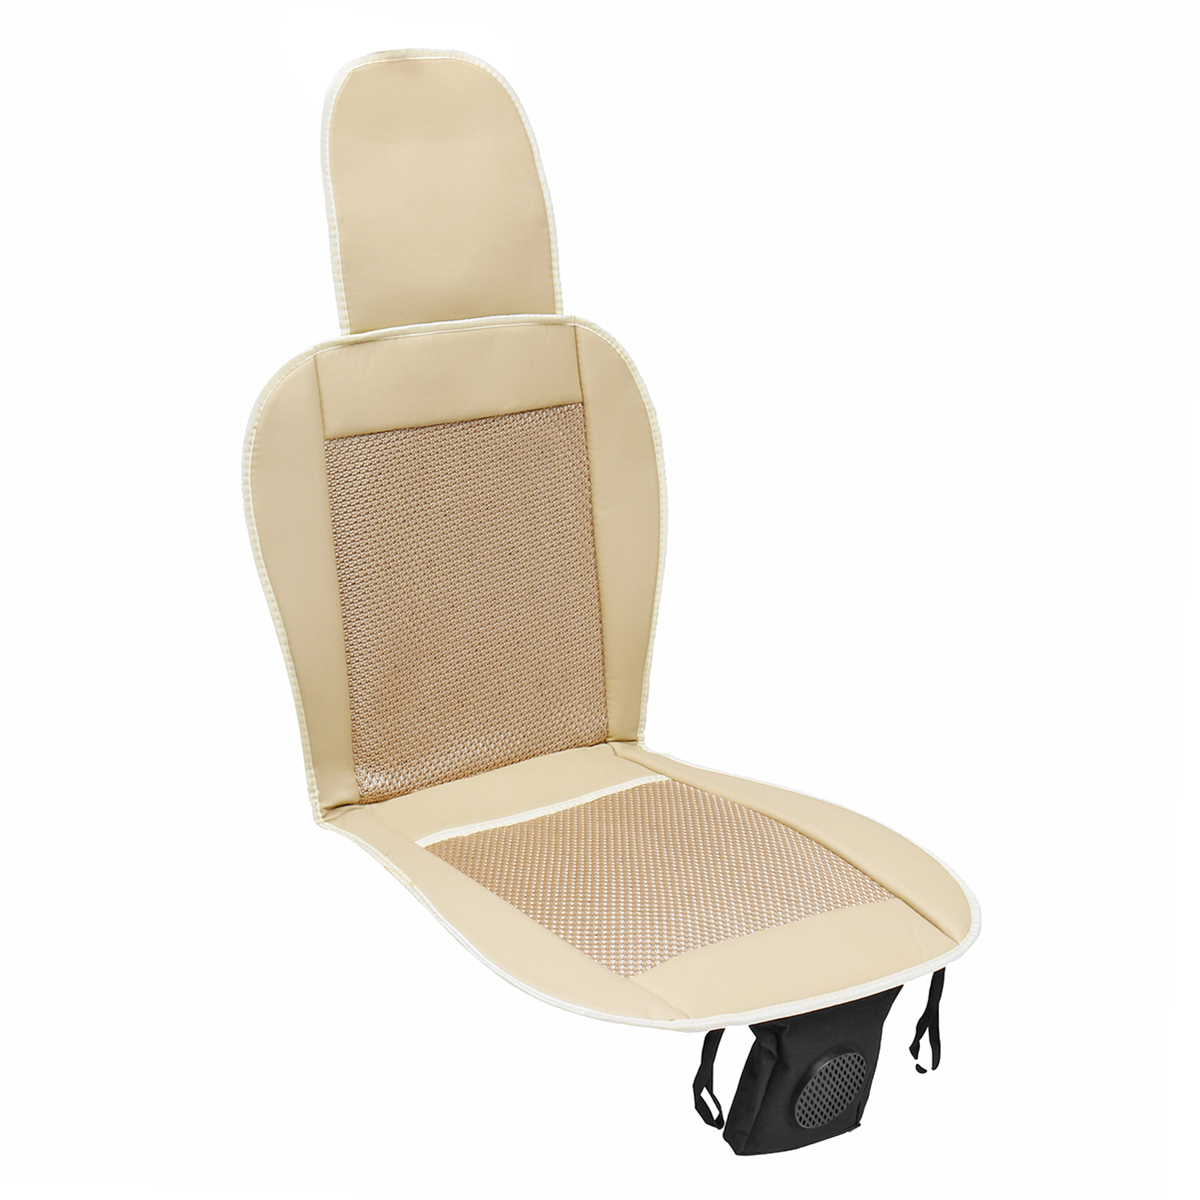 12V-Car-Cooling-Seat-Cushion-Covers-Speed-Control-Ventilate-Breathable-Summer-Chair-Fan-1331752